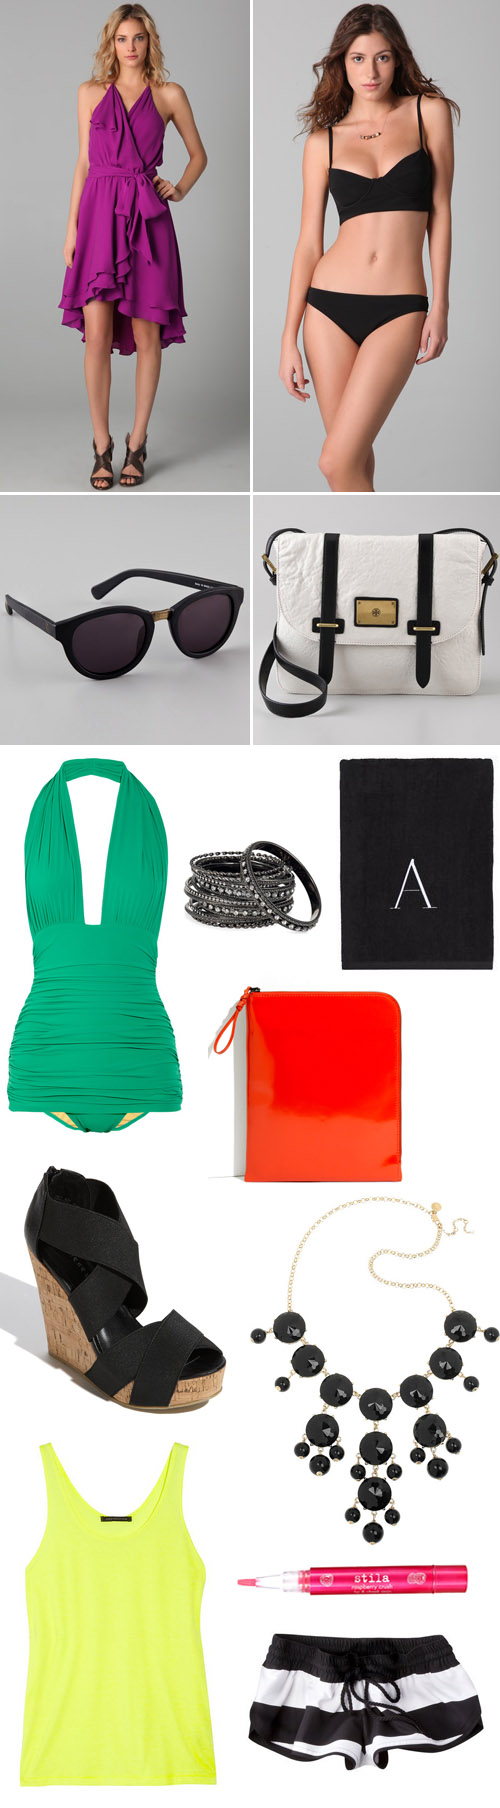 black and white honeymoon and resort fashion with bright pops of color!